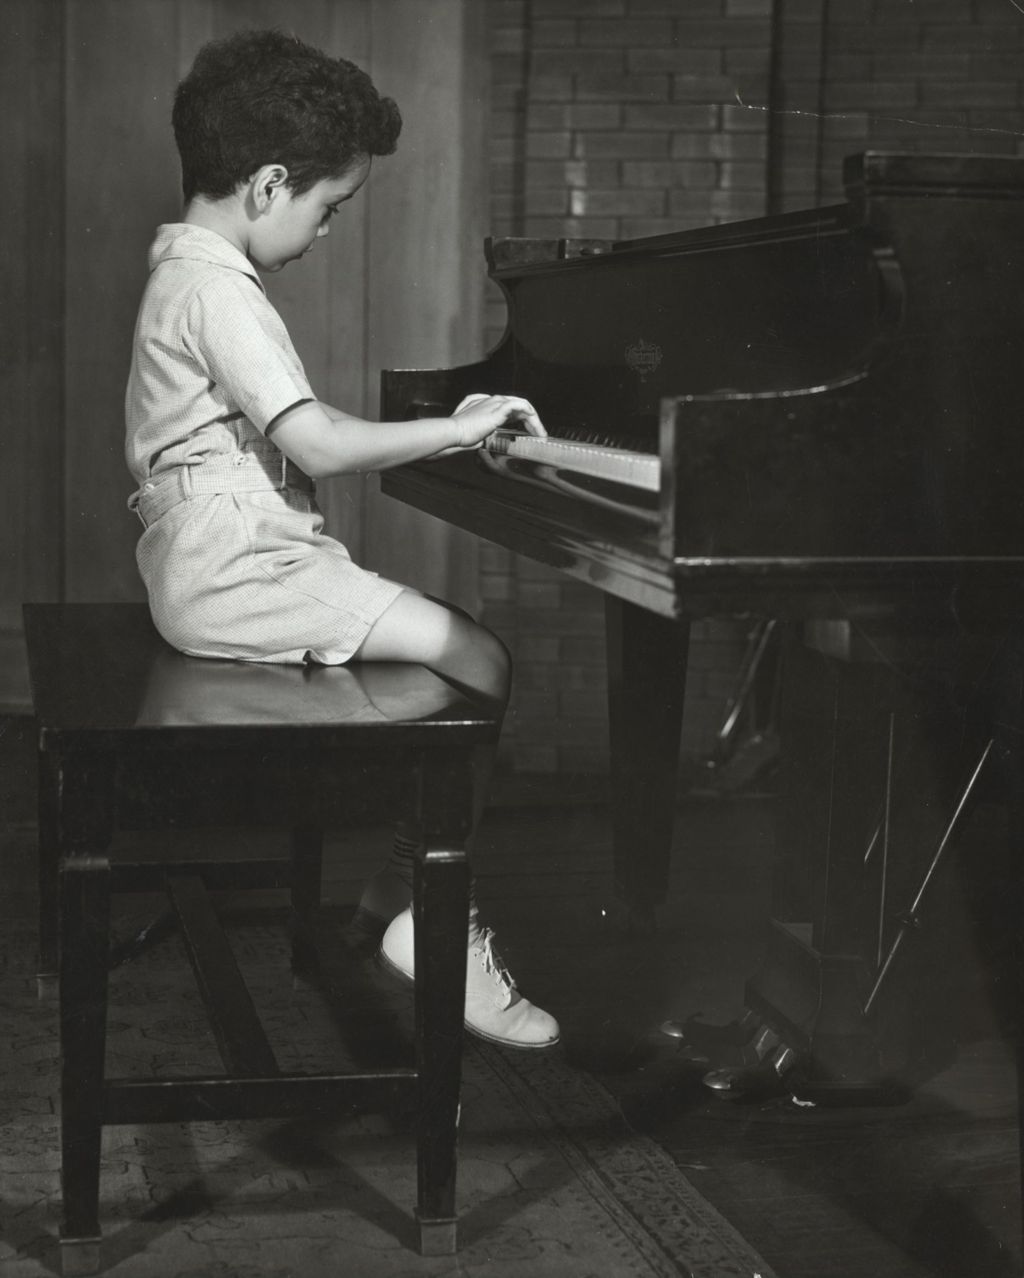 Miniature of Young boy playing piano at Hull-House Music School